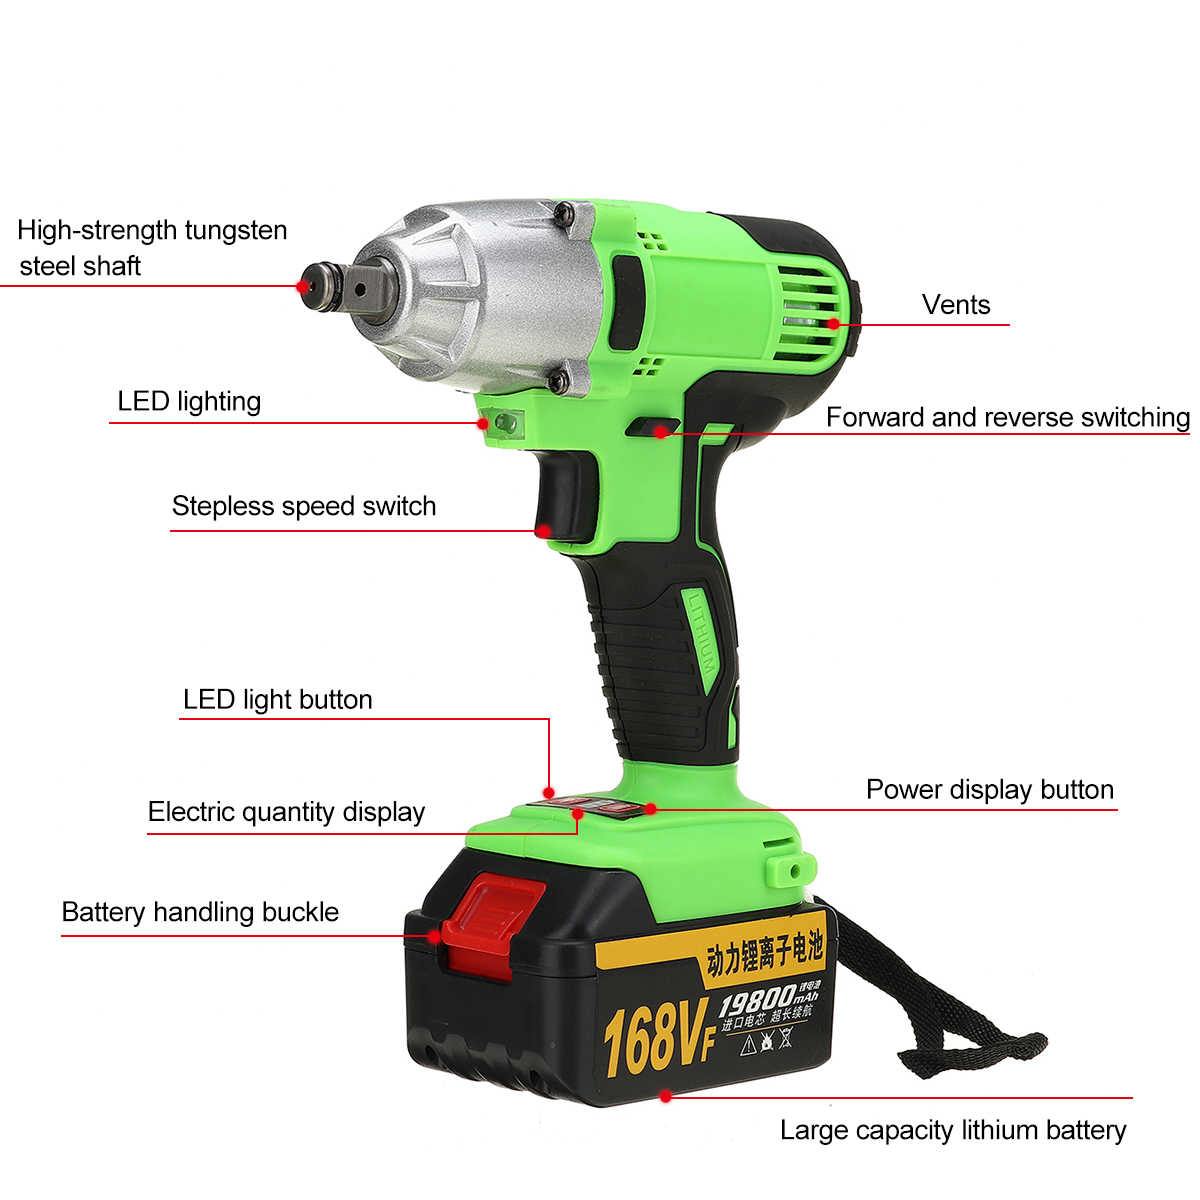 168VF-19800mAh-330NM-Electric-Impact-Wrench-Li-ion-Battery-Rechargeable-Power-Tool-1704614-9